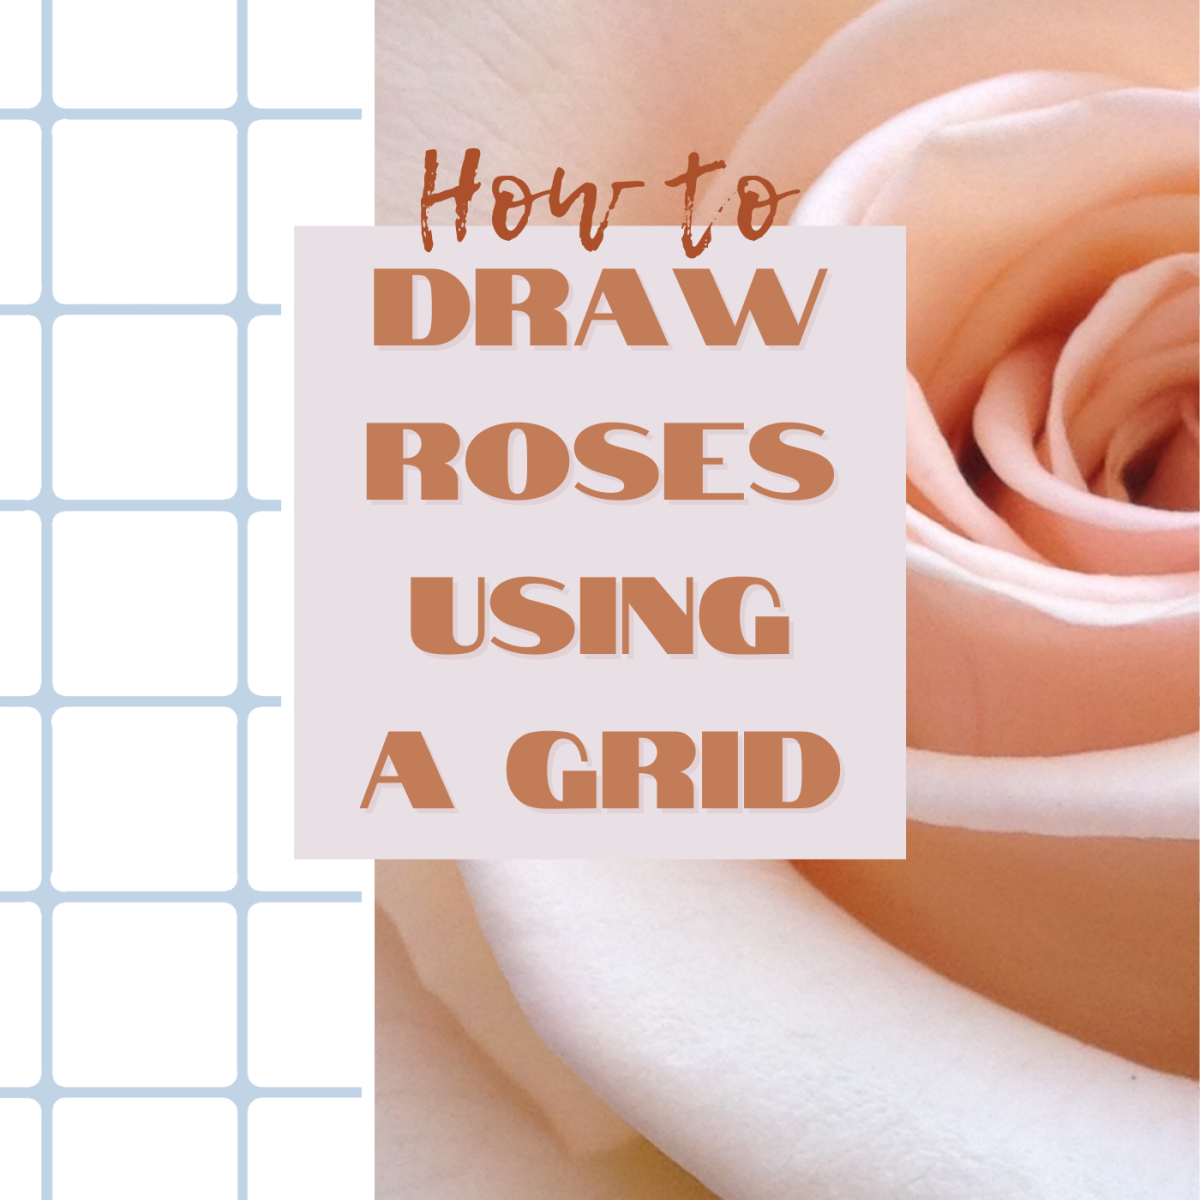 Learn how to use a grid to draw realistic roses.